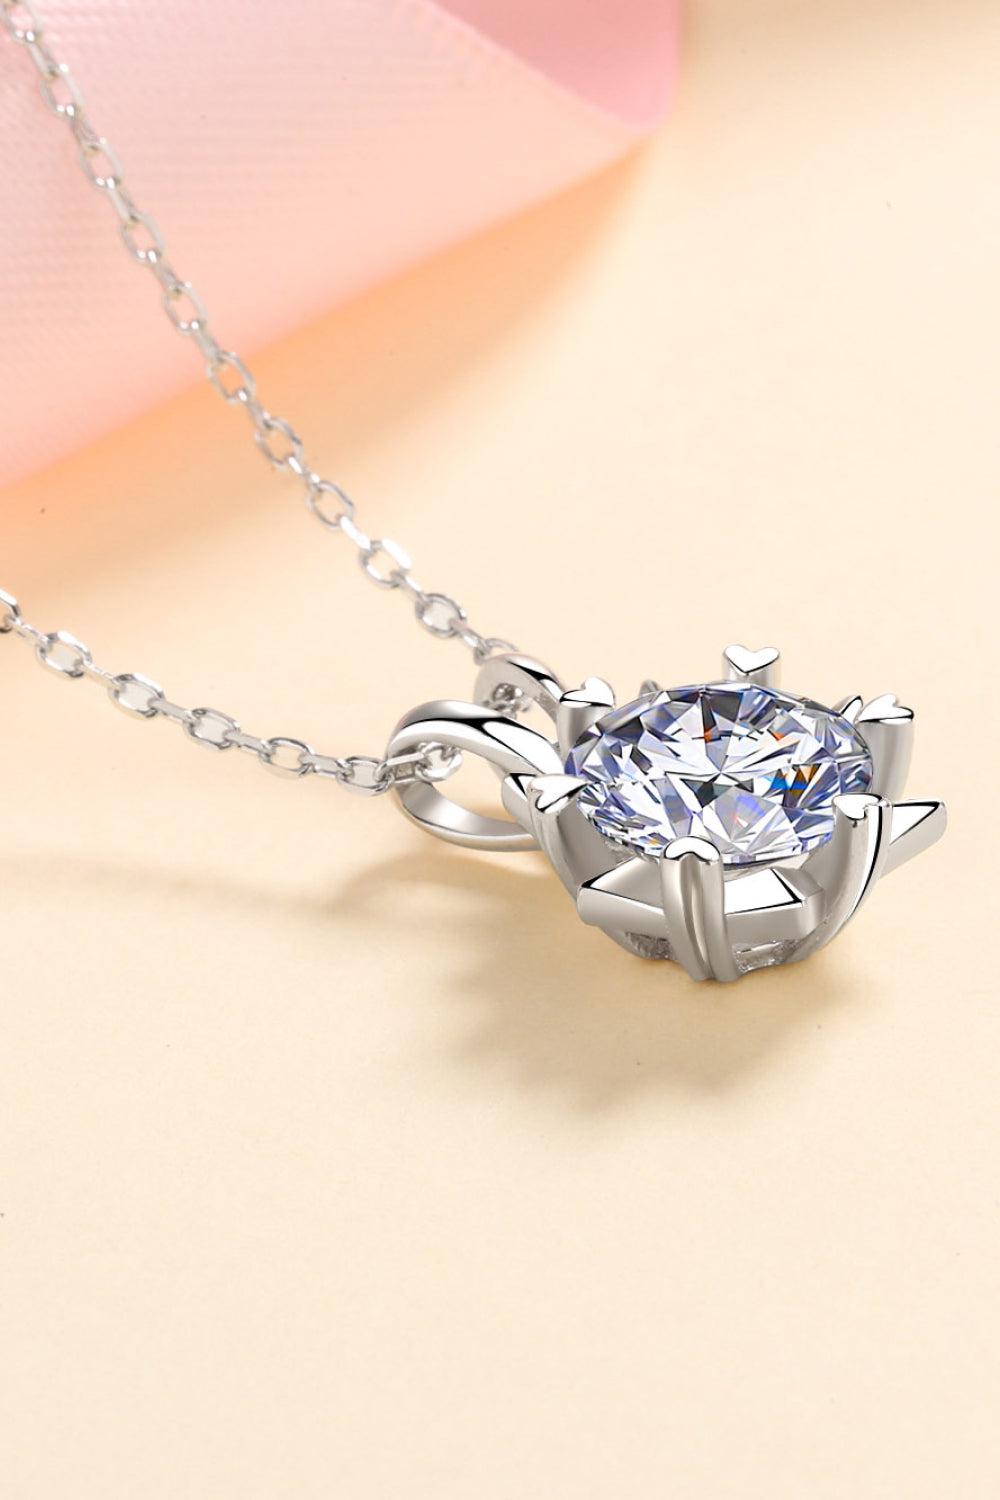 Learning To Love 925 Sterling Silver Moissanite Pendant Necklace BLUE ZONE PLANET